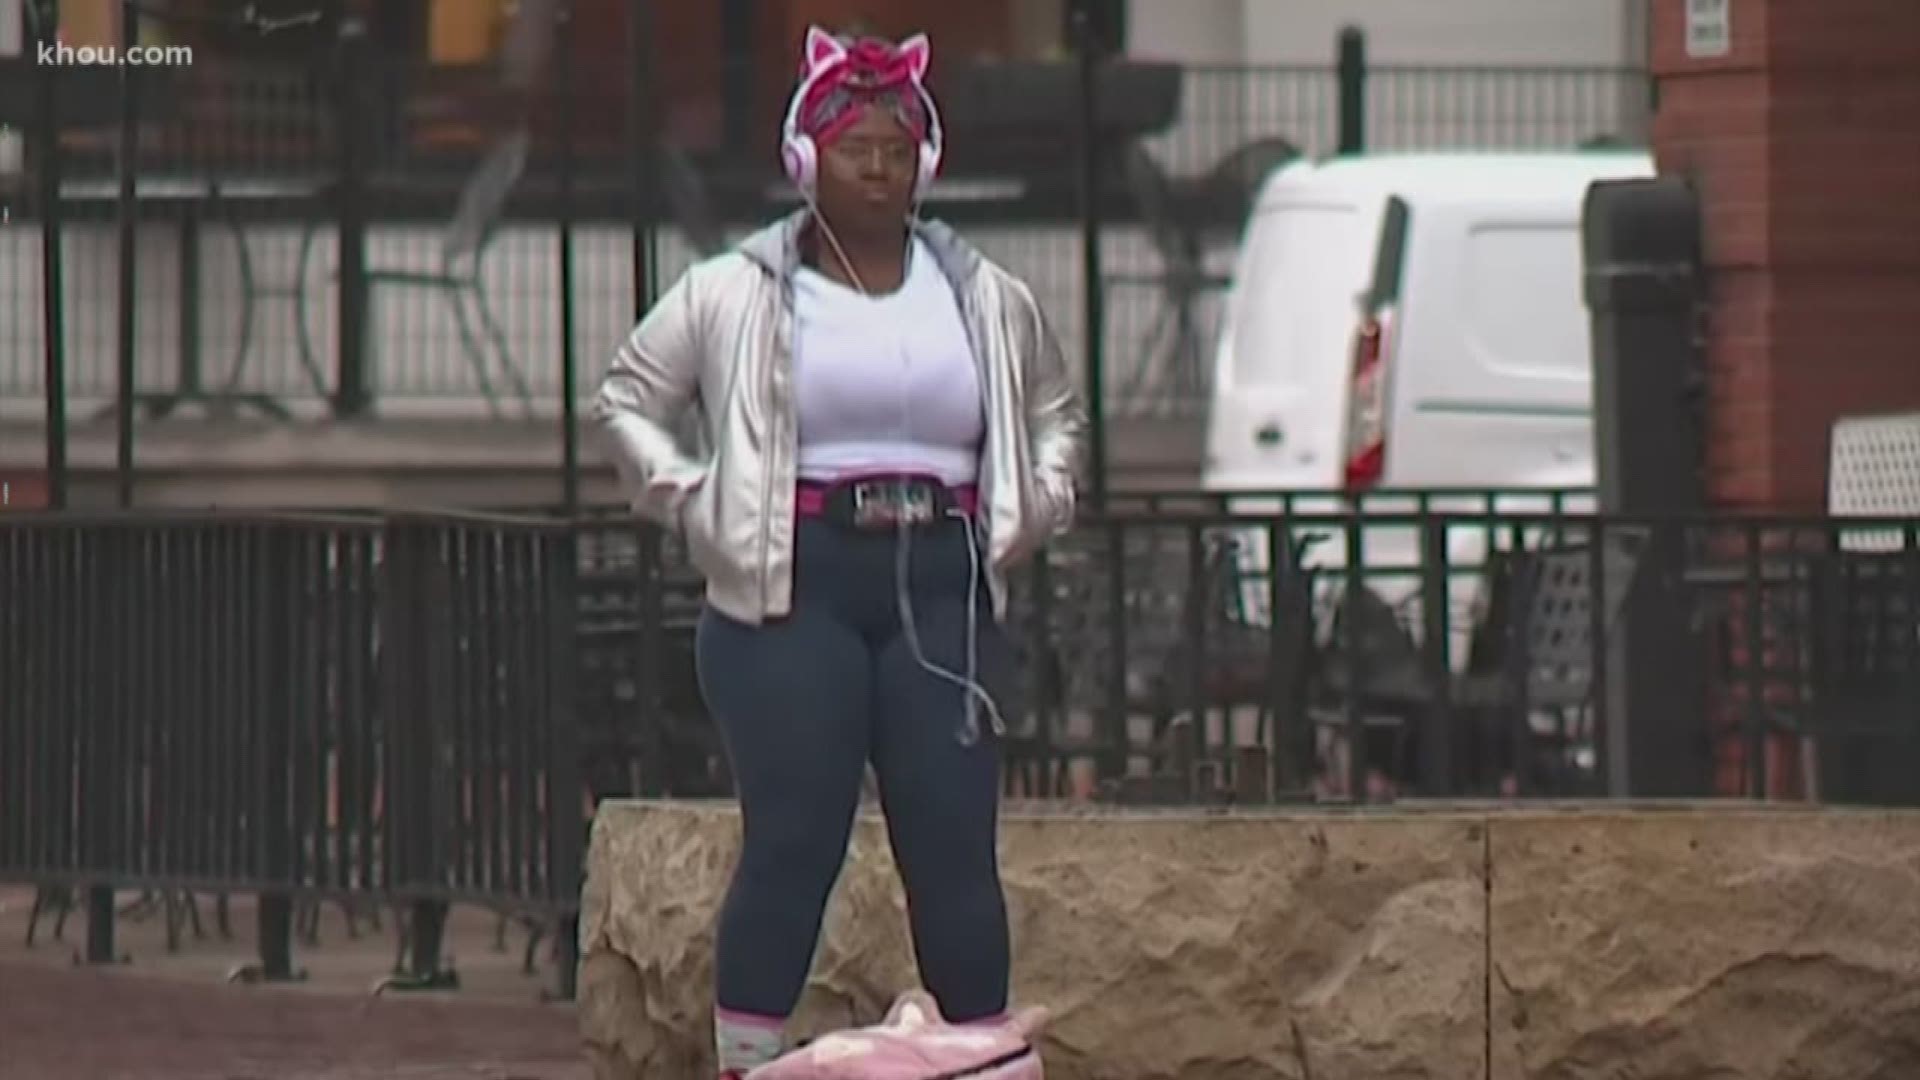 A photographer at our sister station in Dallas captured a woman dancing at a bus stop.